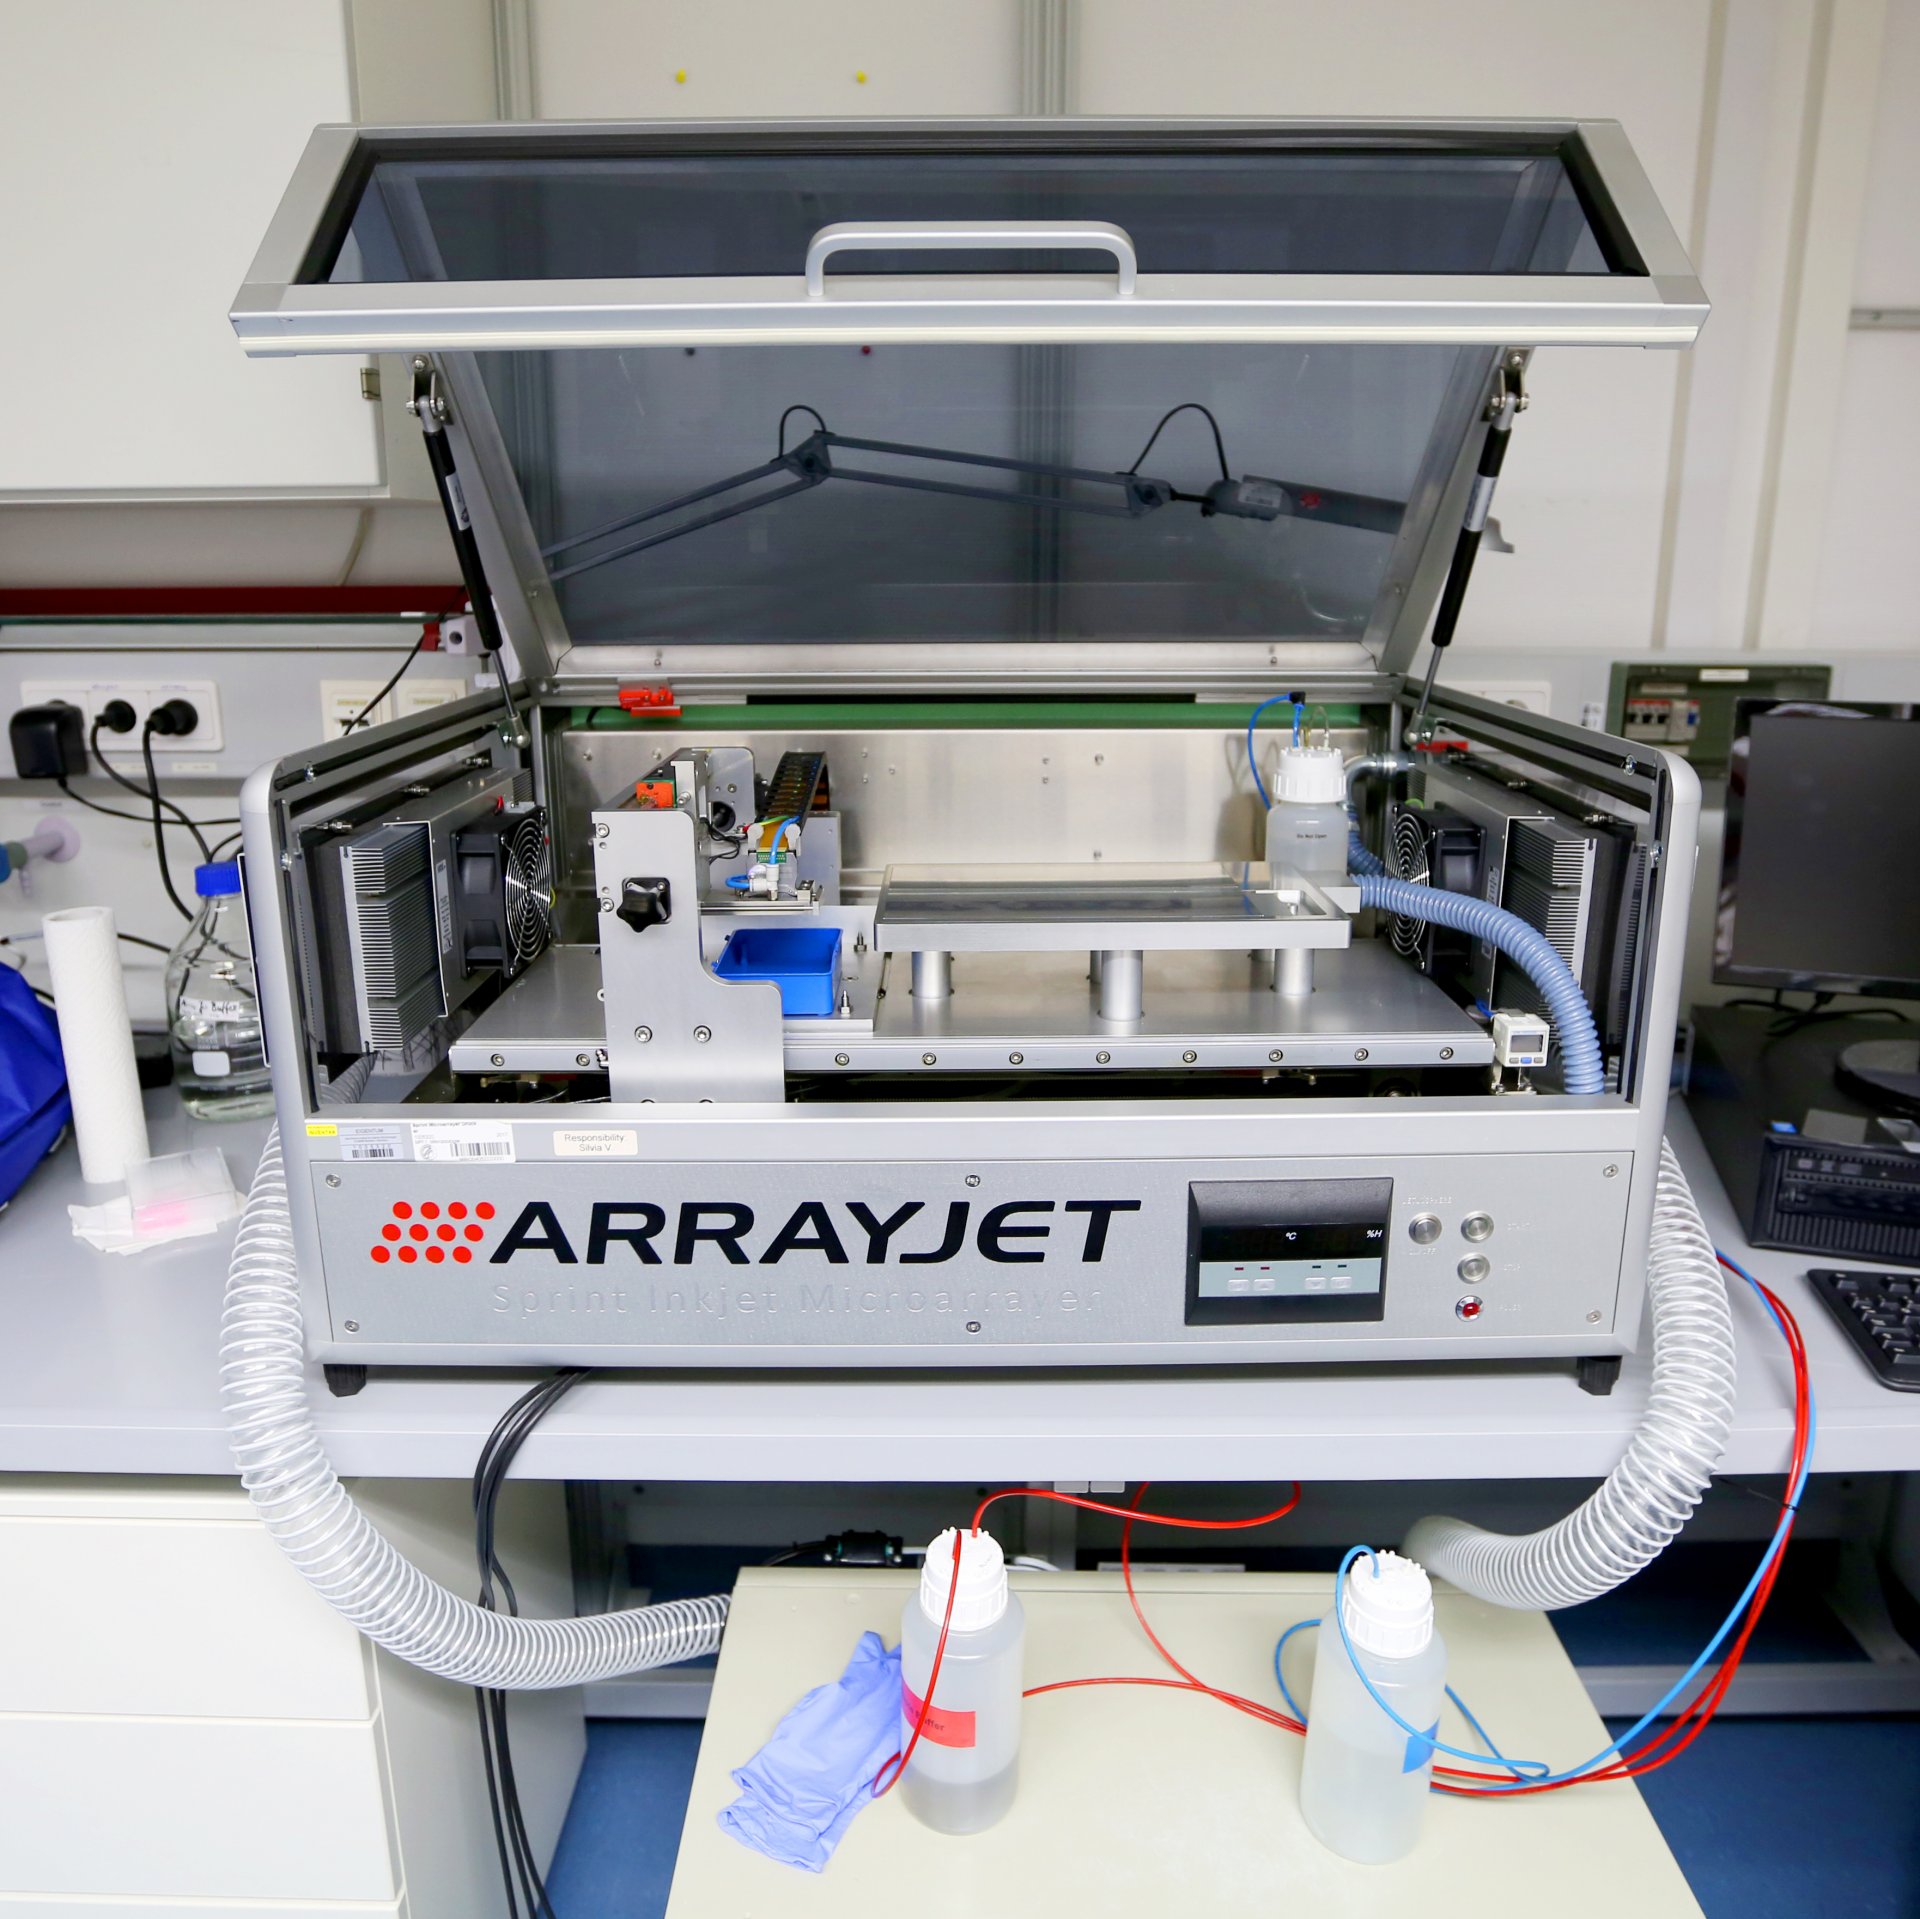 In the arrayjet robot, the microarrays were "printed" with the sugar molecules. (© Max Planck Institute for Marine Microbiology/K. Matthes)